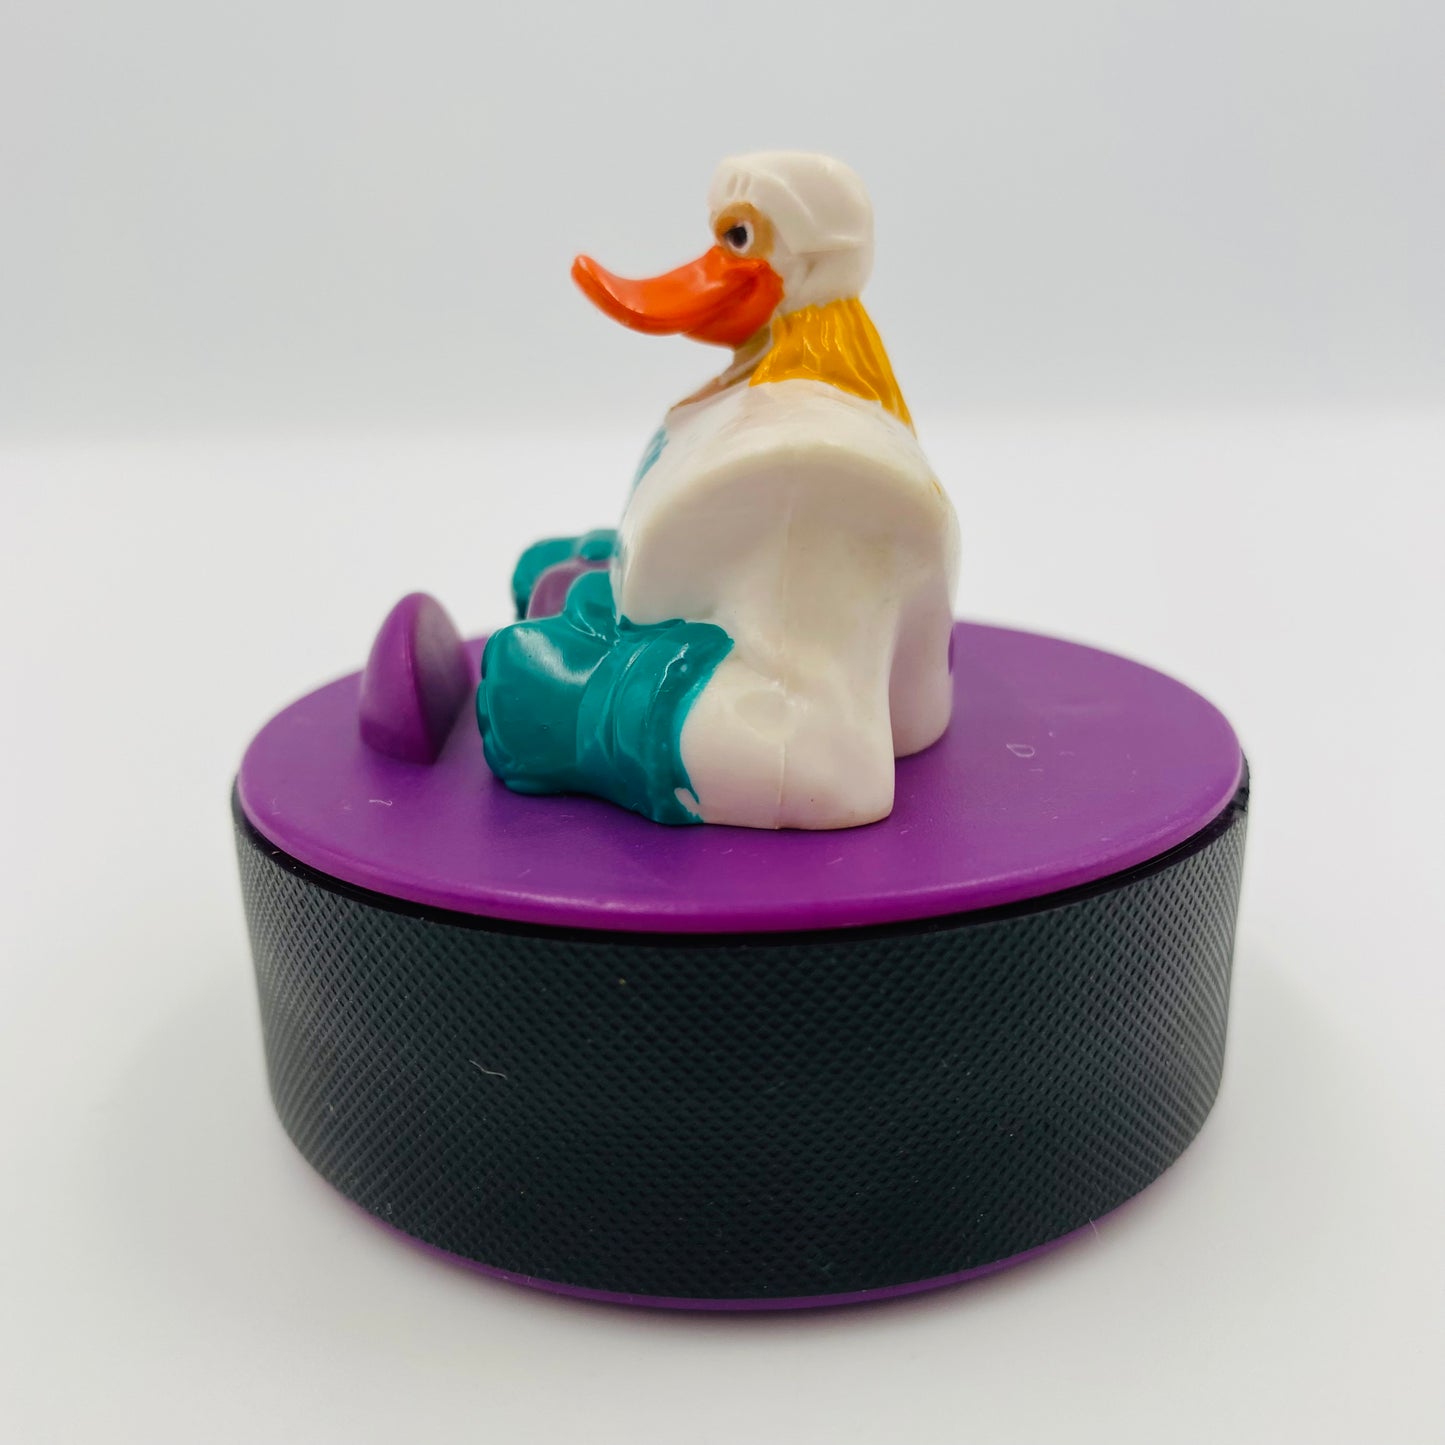 Mighty Ducks the Animated Series Nosedive McDonald's Happy Meal mobile toy puck (1997) loose